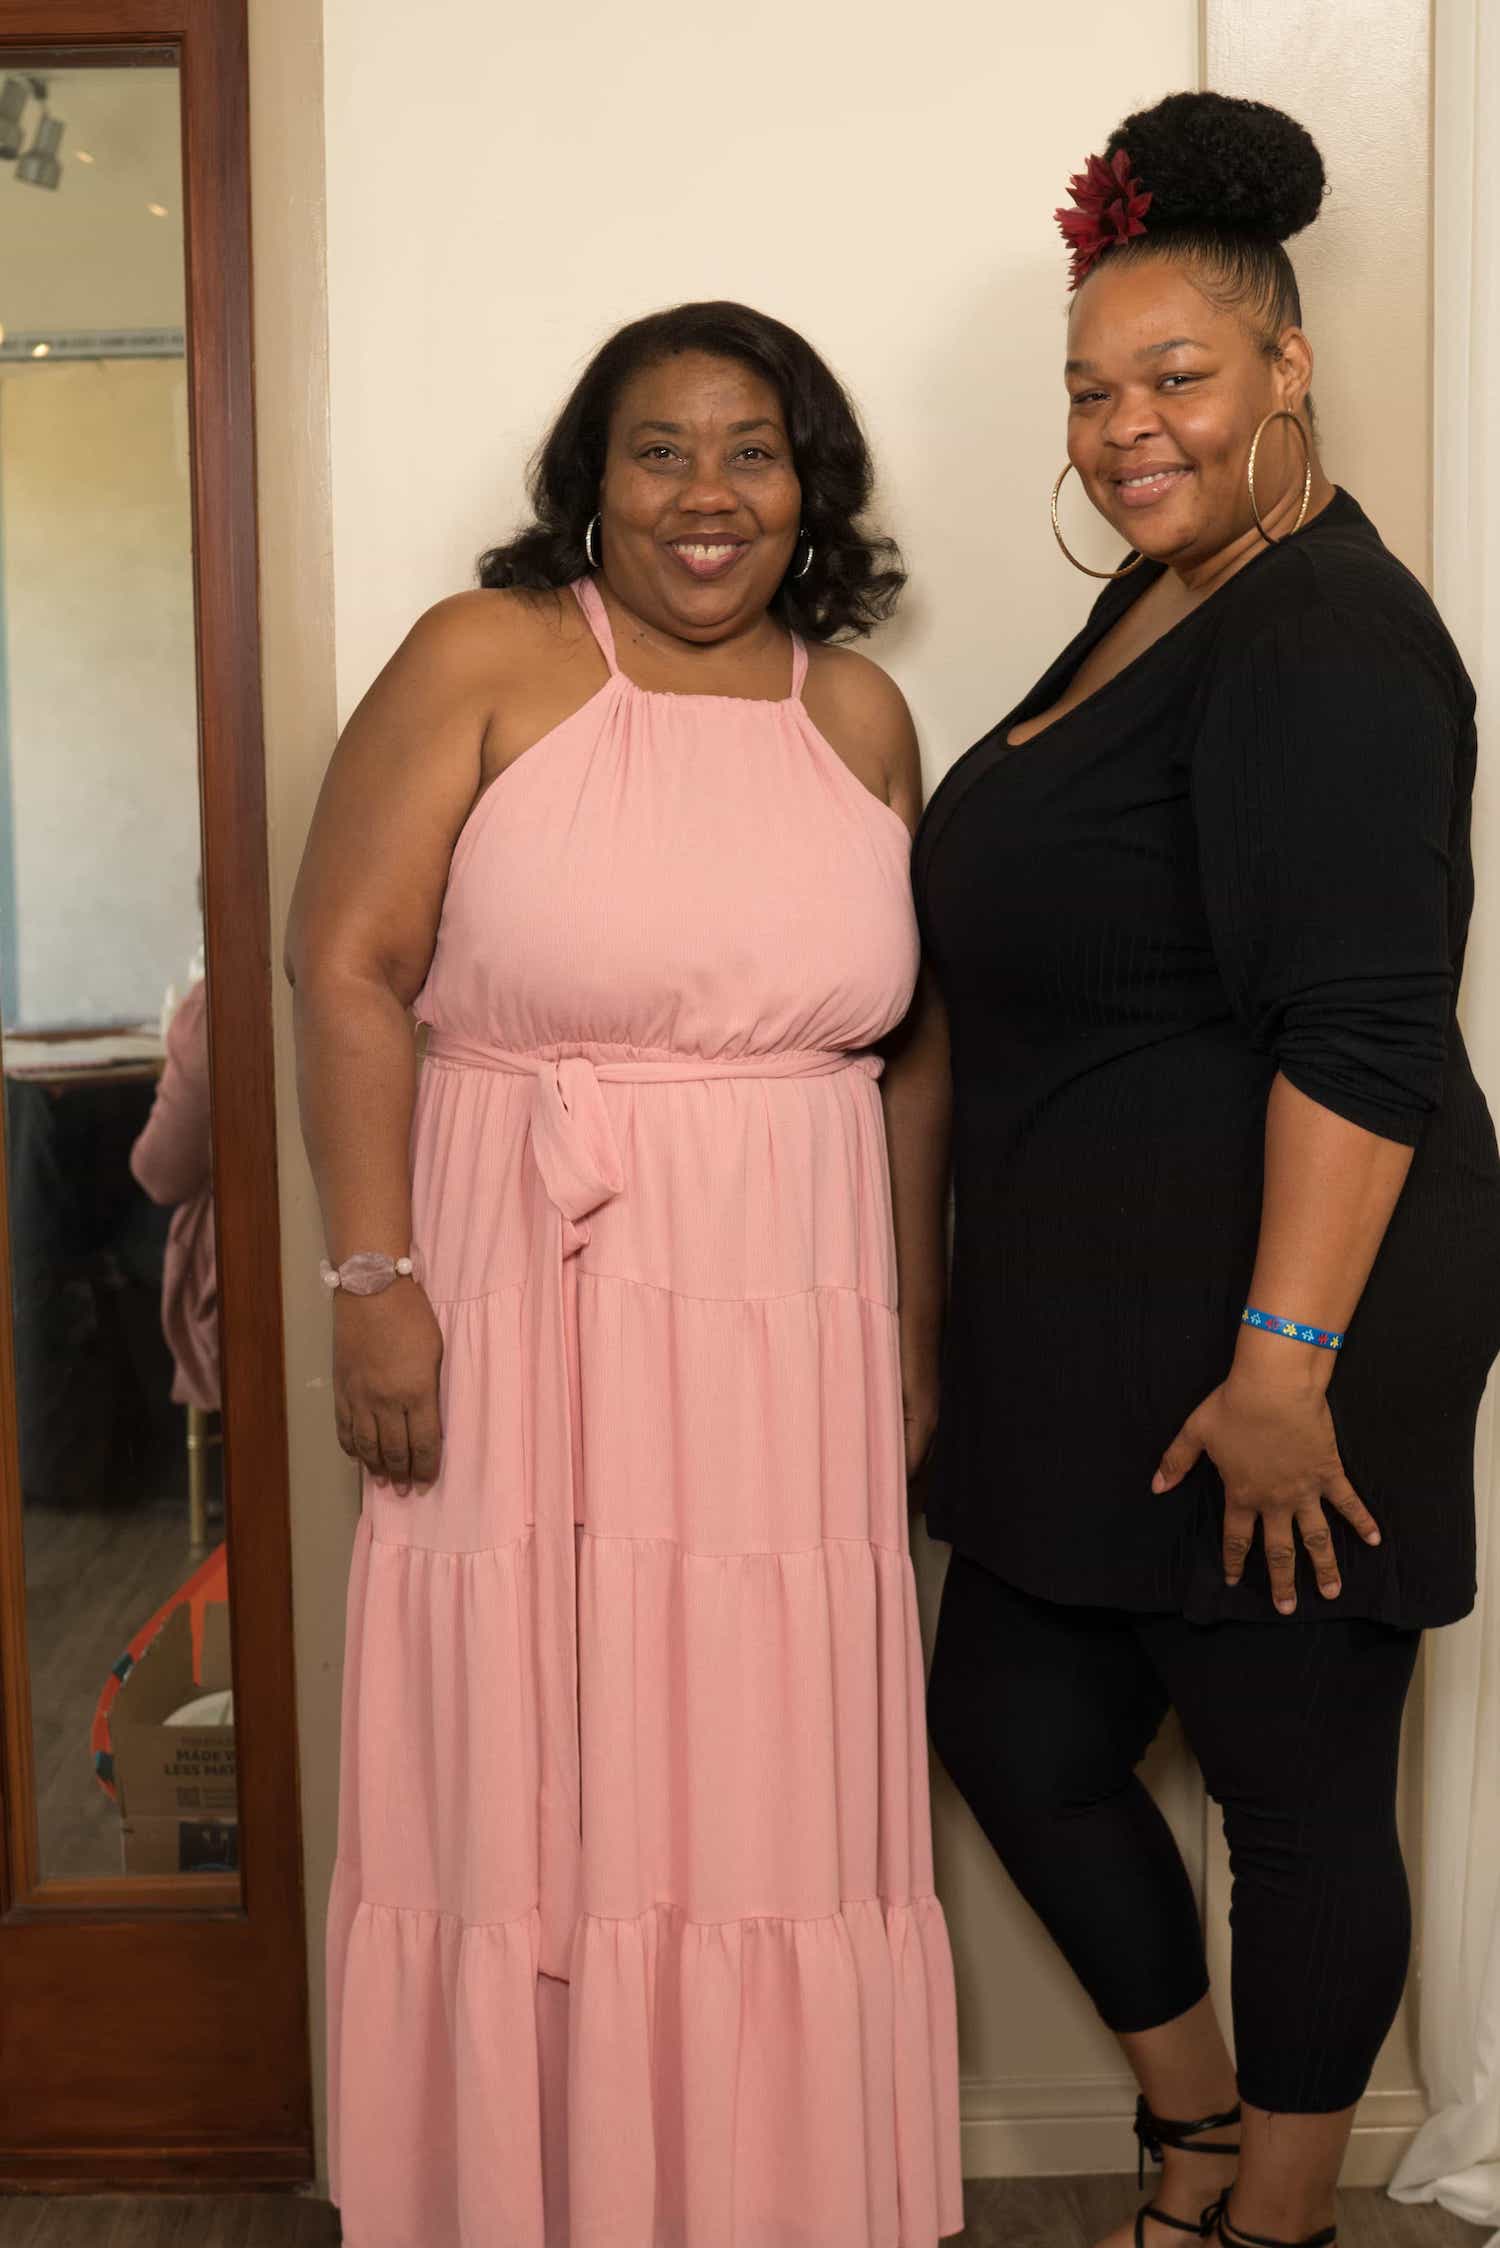 Black Women for Wellness Annual Risqué Breast Health Conference 13